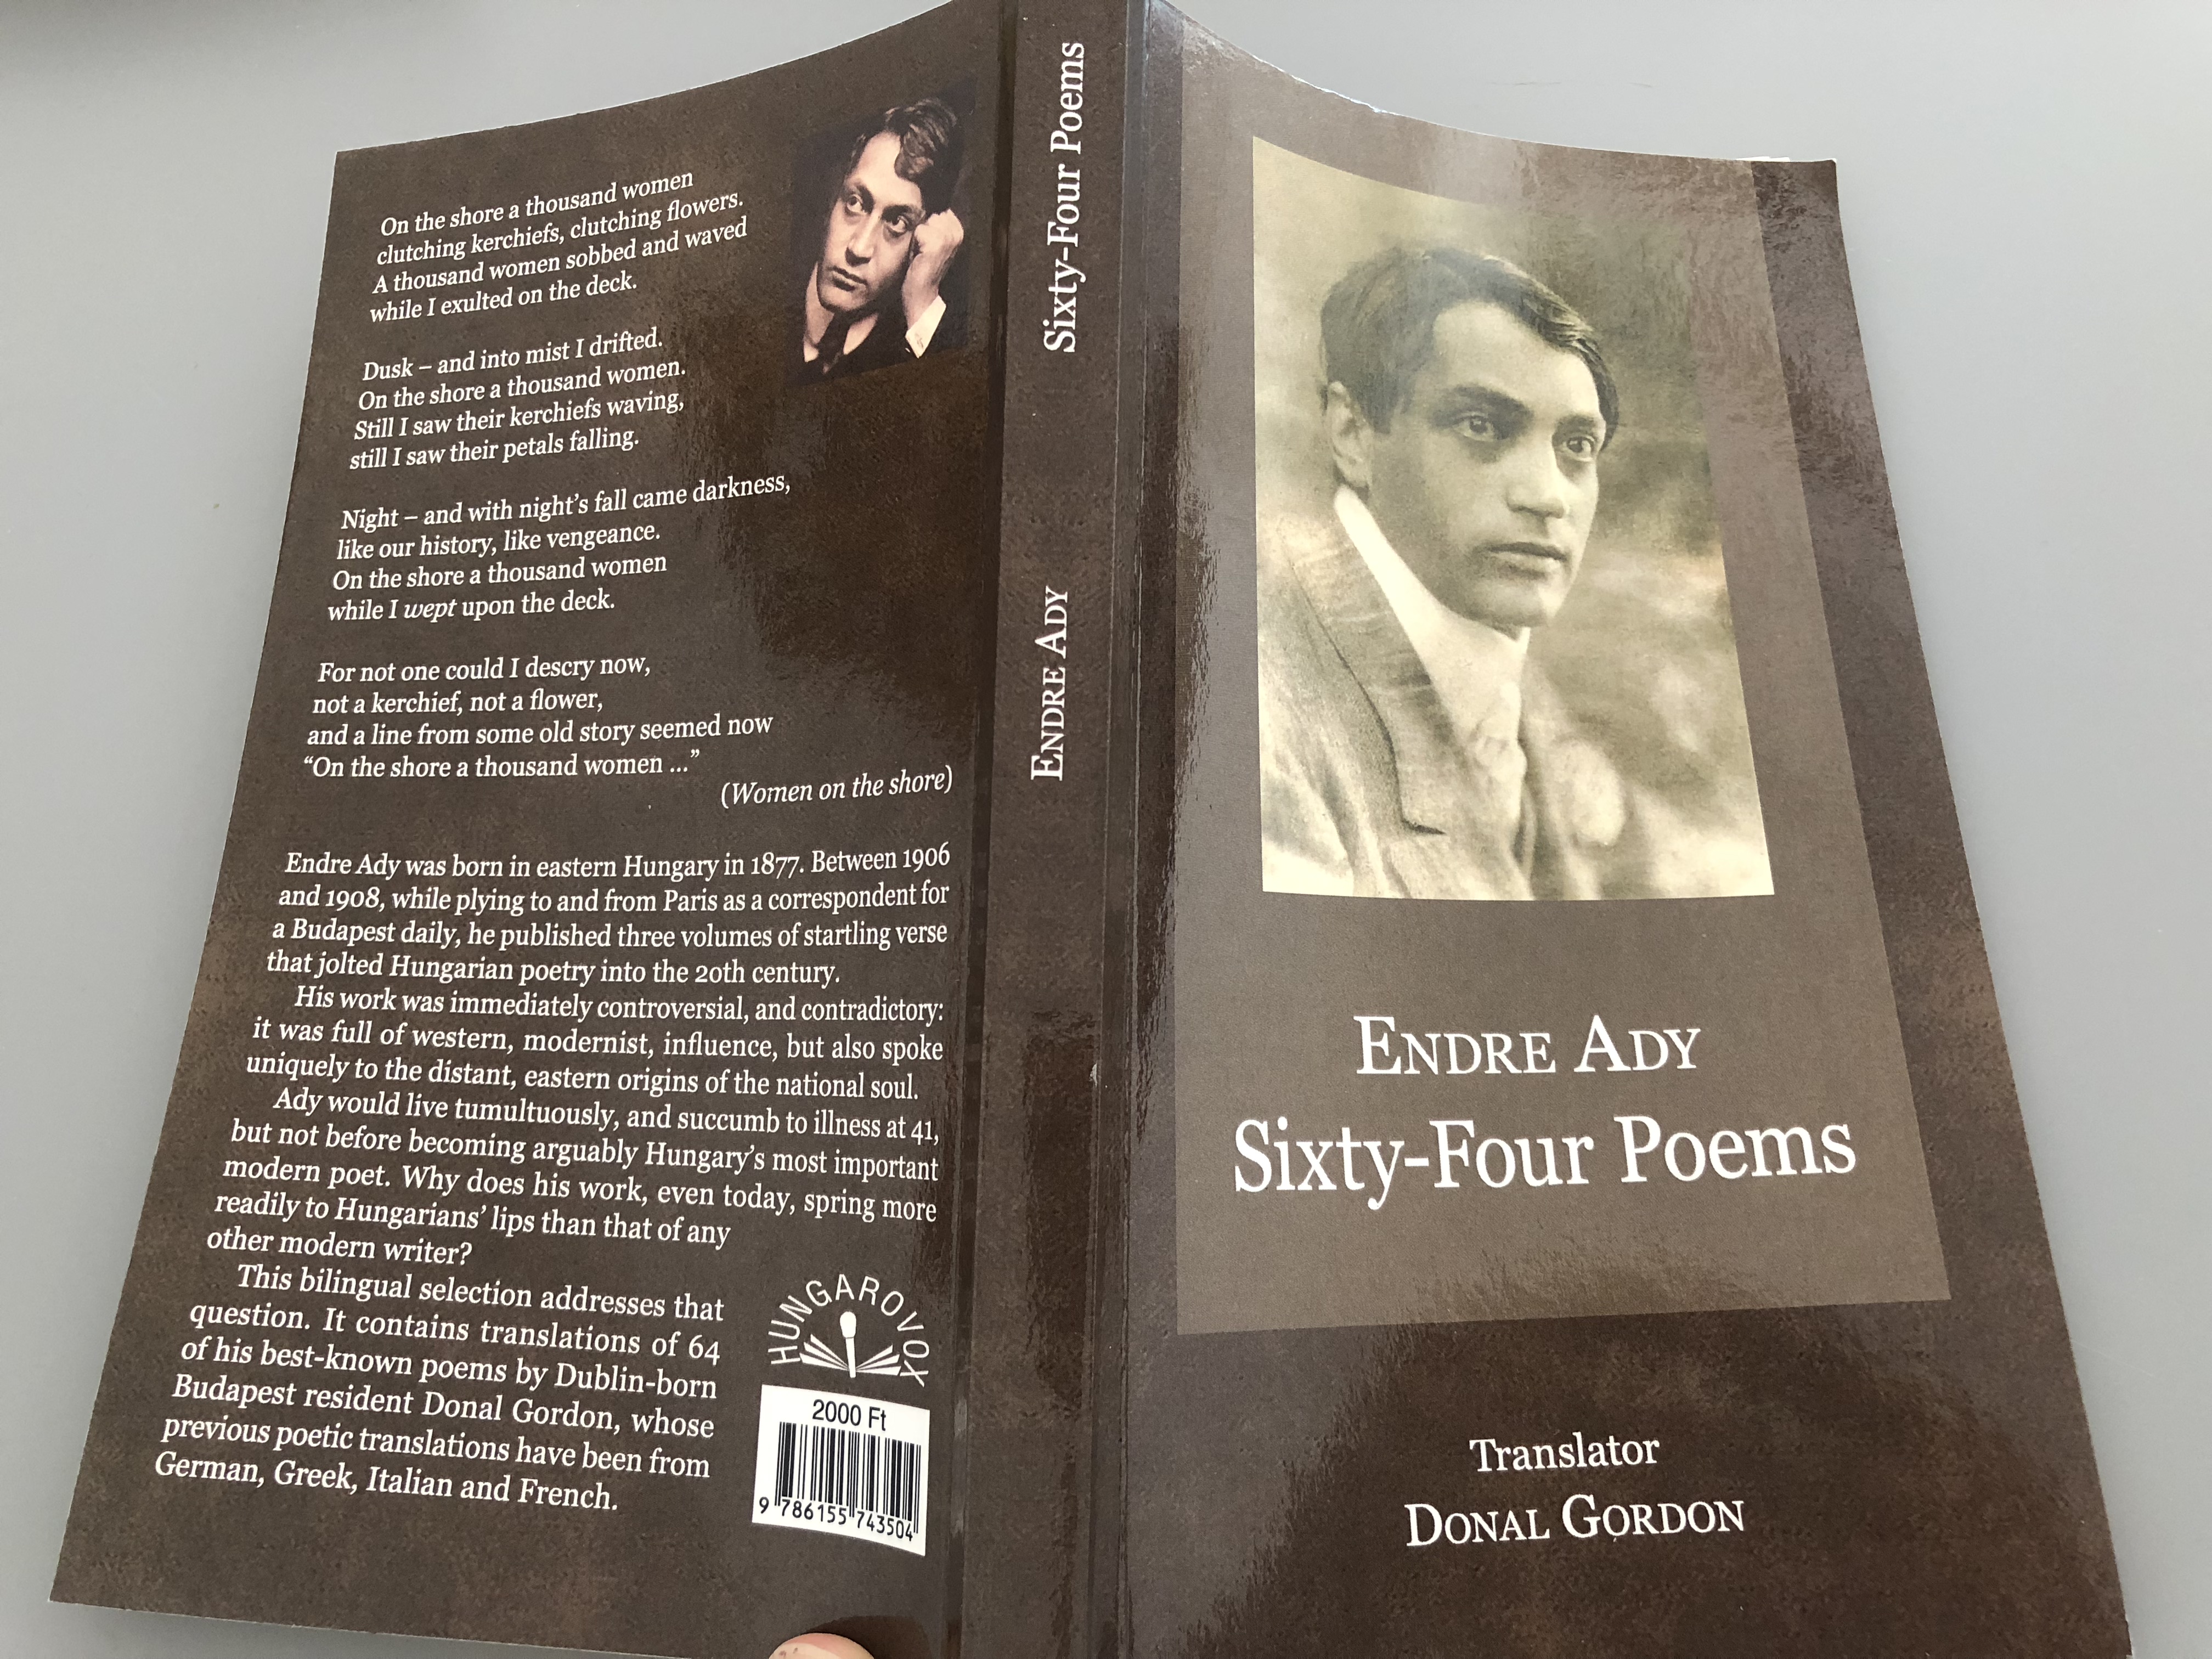 sixty-four-poems-by-endre-ady-translated-by-donal-gordon-hungarian-english-parallel-poetry-book-paperback-2018-hungarovox-13-.jpg